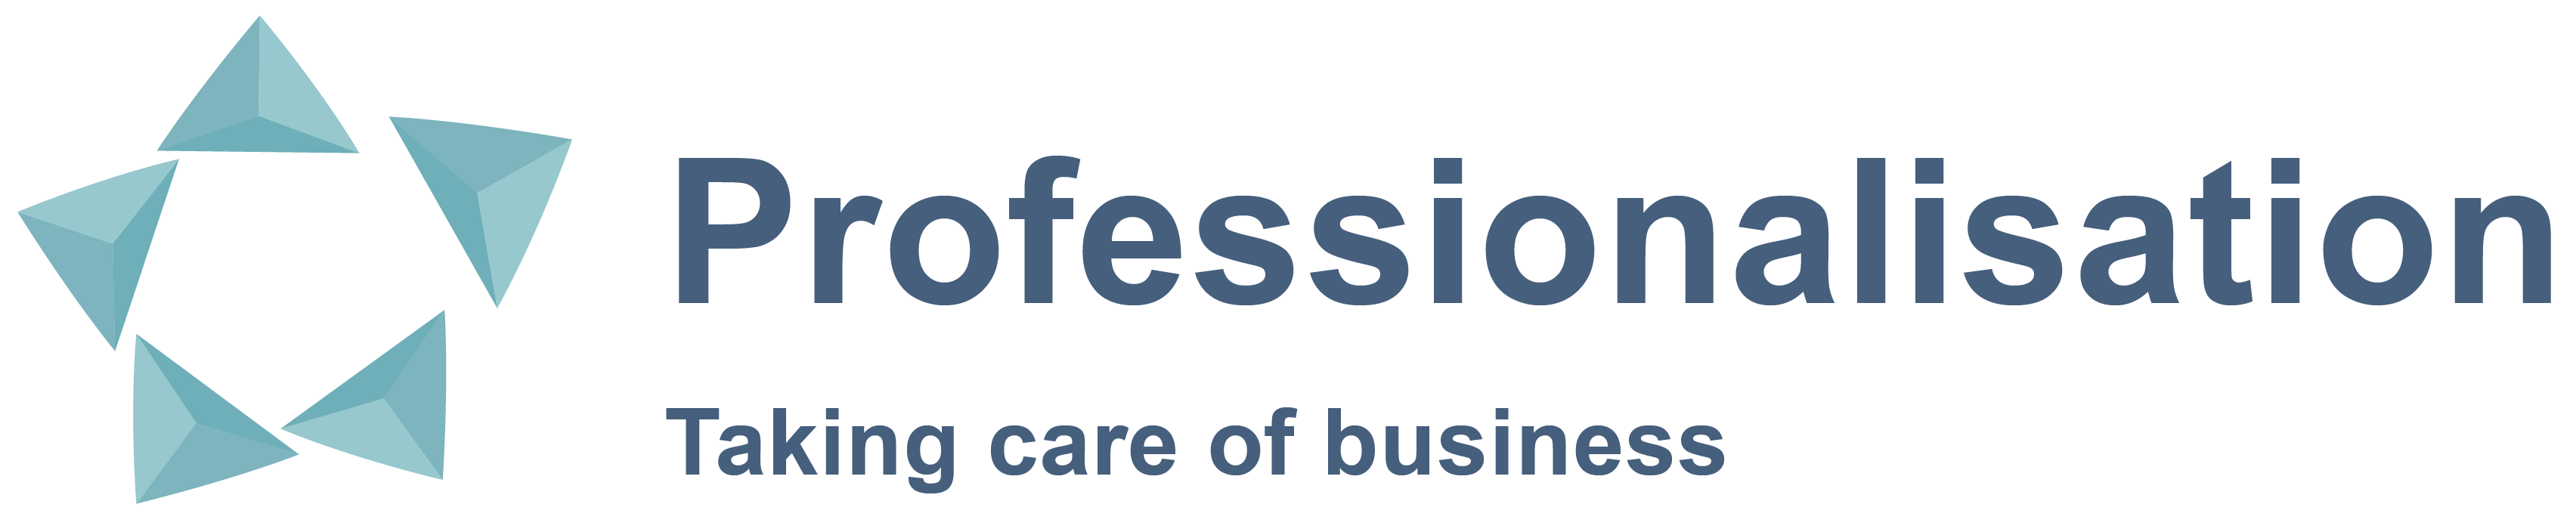 Logo of Professionalisation Limited Business Consultants In Kensington, London